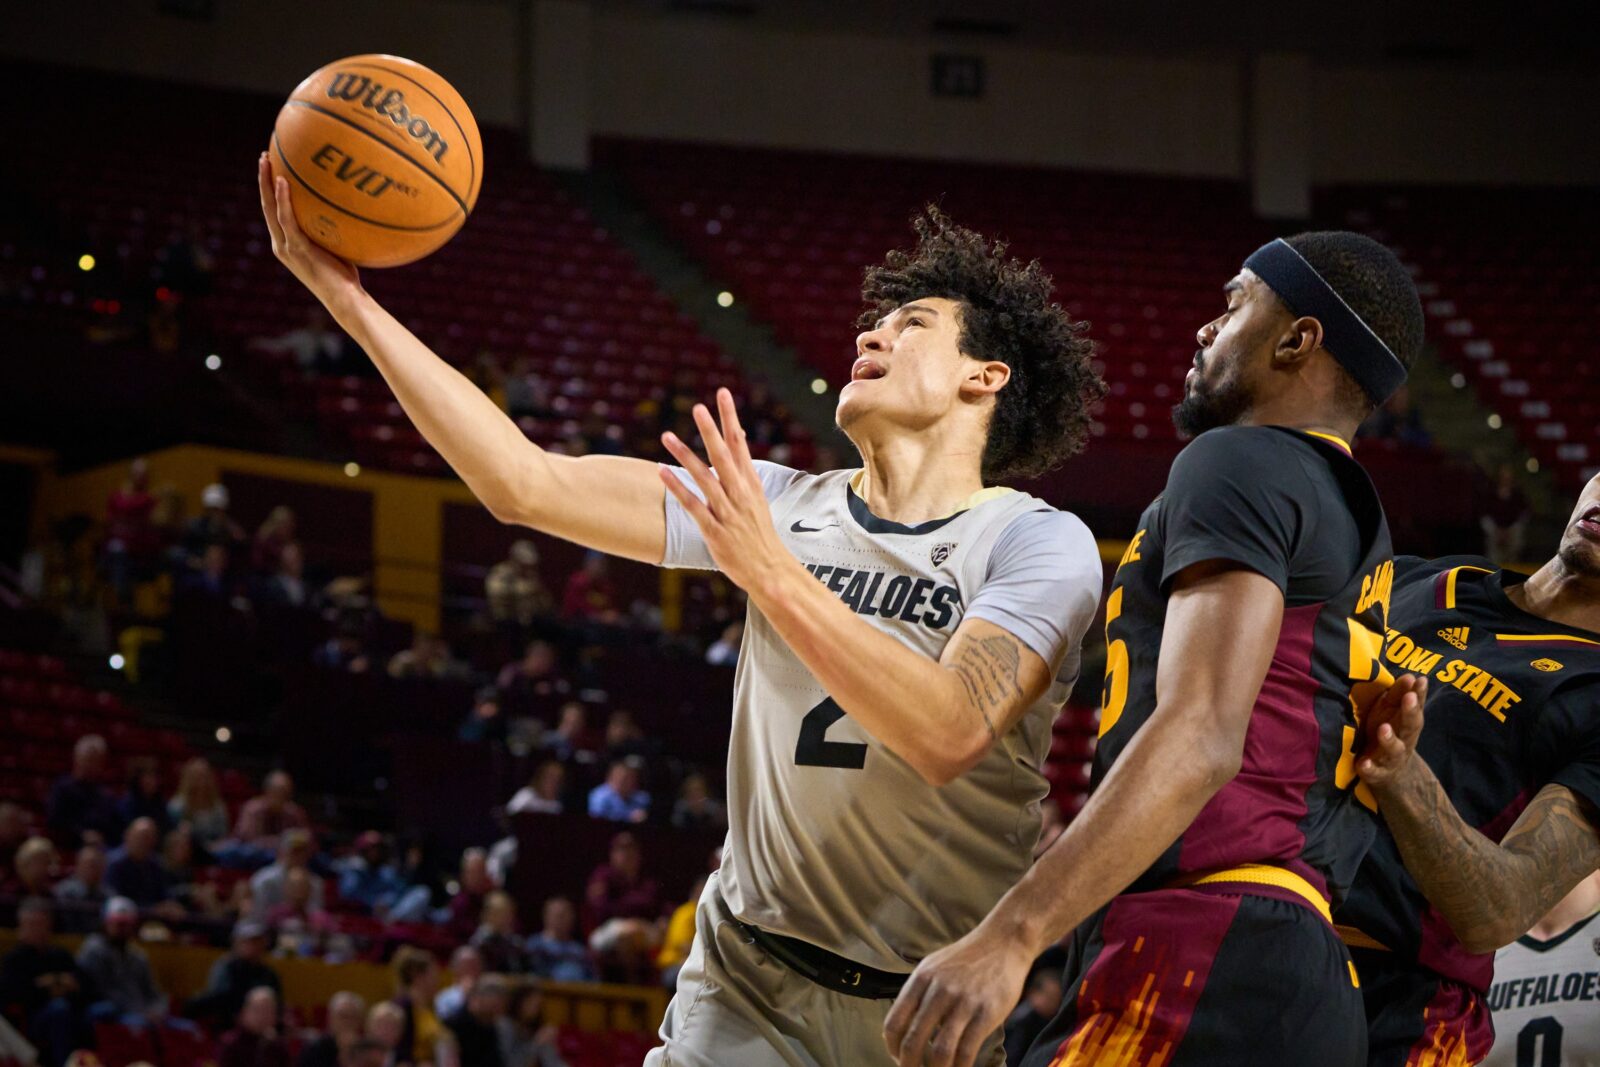 Rooney: 3 extra points from CU Buffs' road win at Arizona State